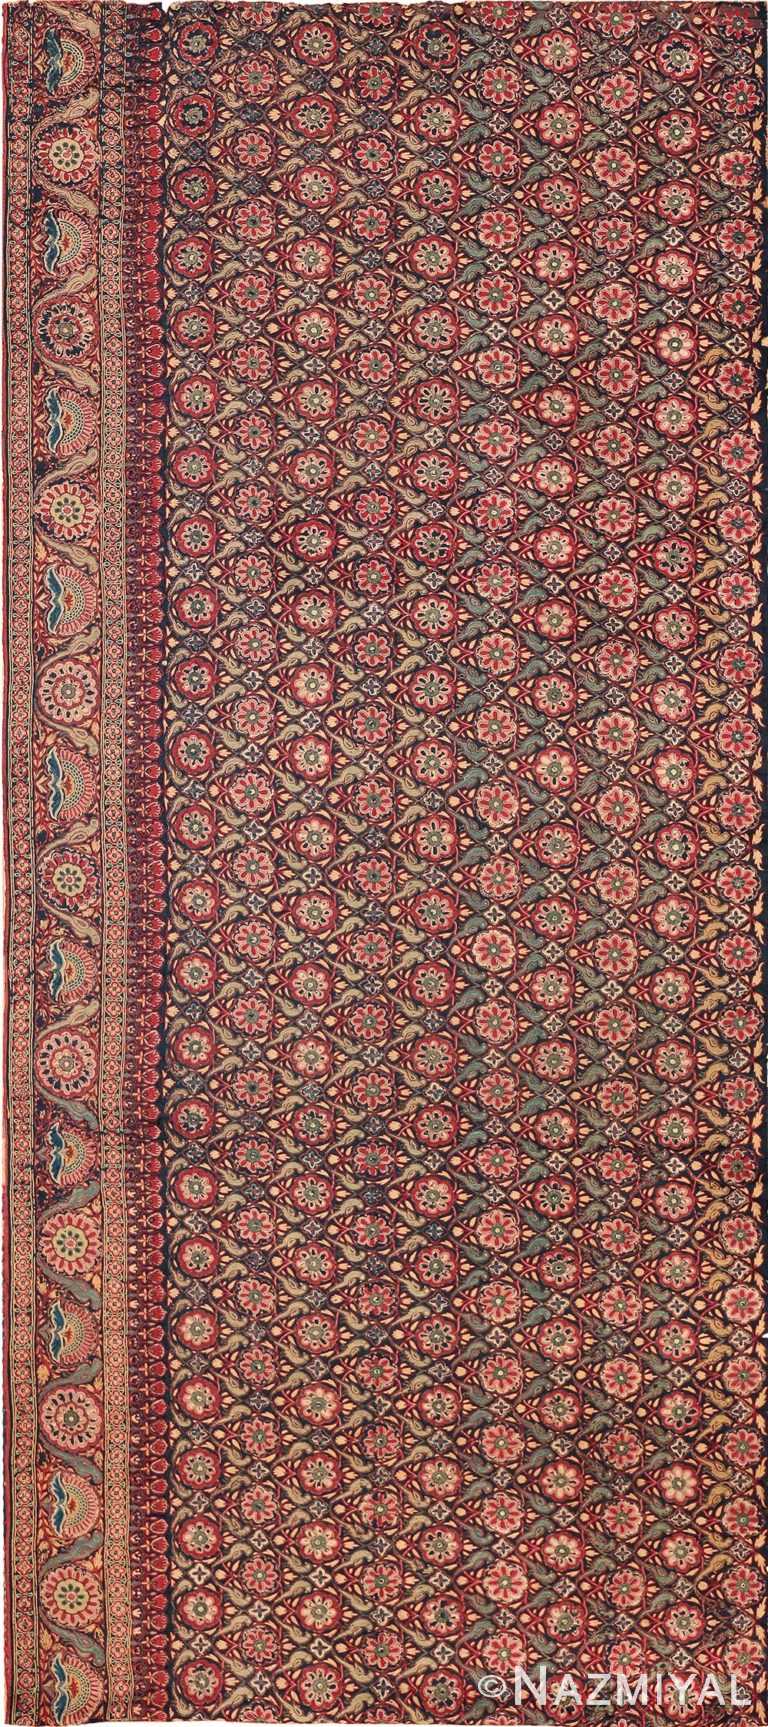 18th Century Indian Embroidery Textile 40364 Nazmiyal